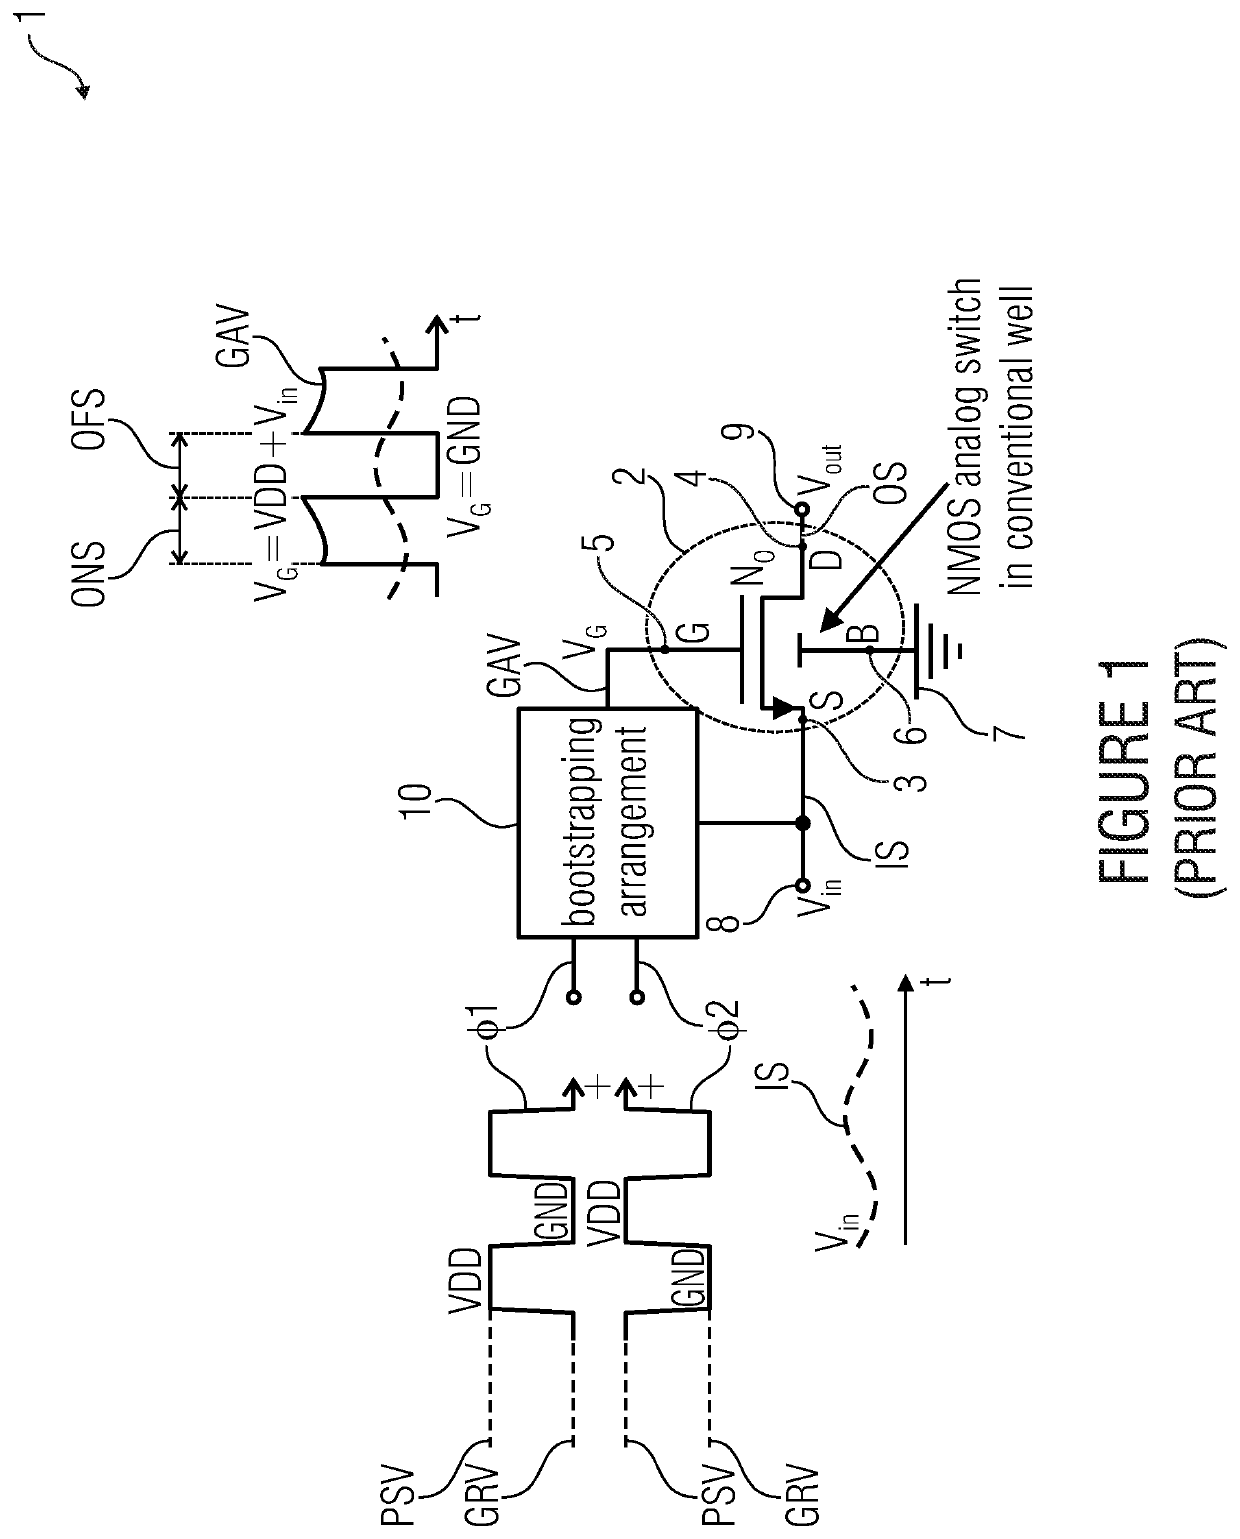 Switch device for switching an analog electrical input signal